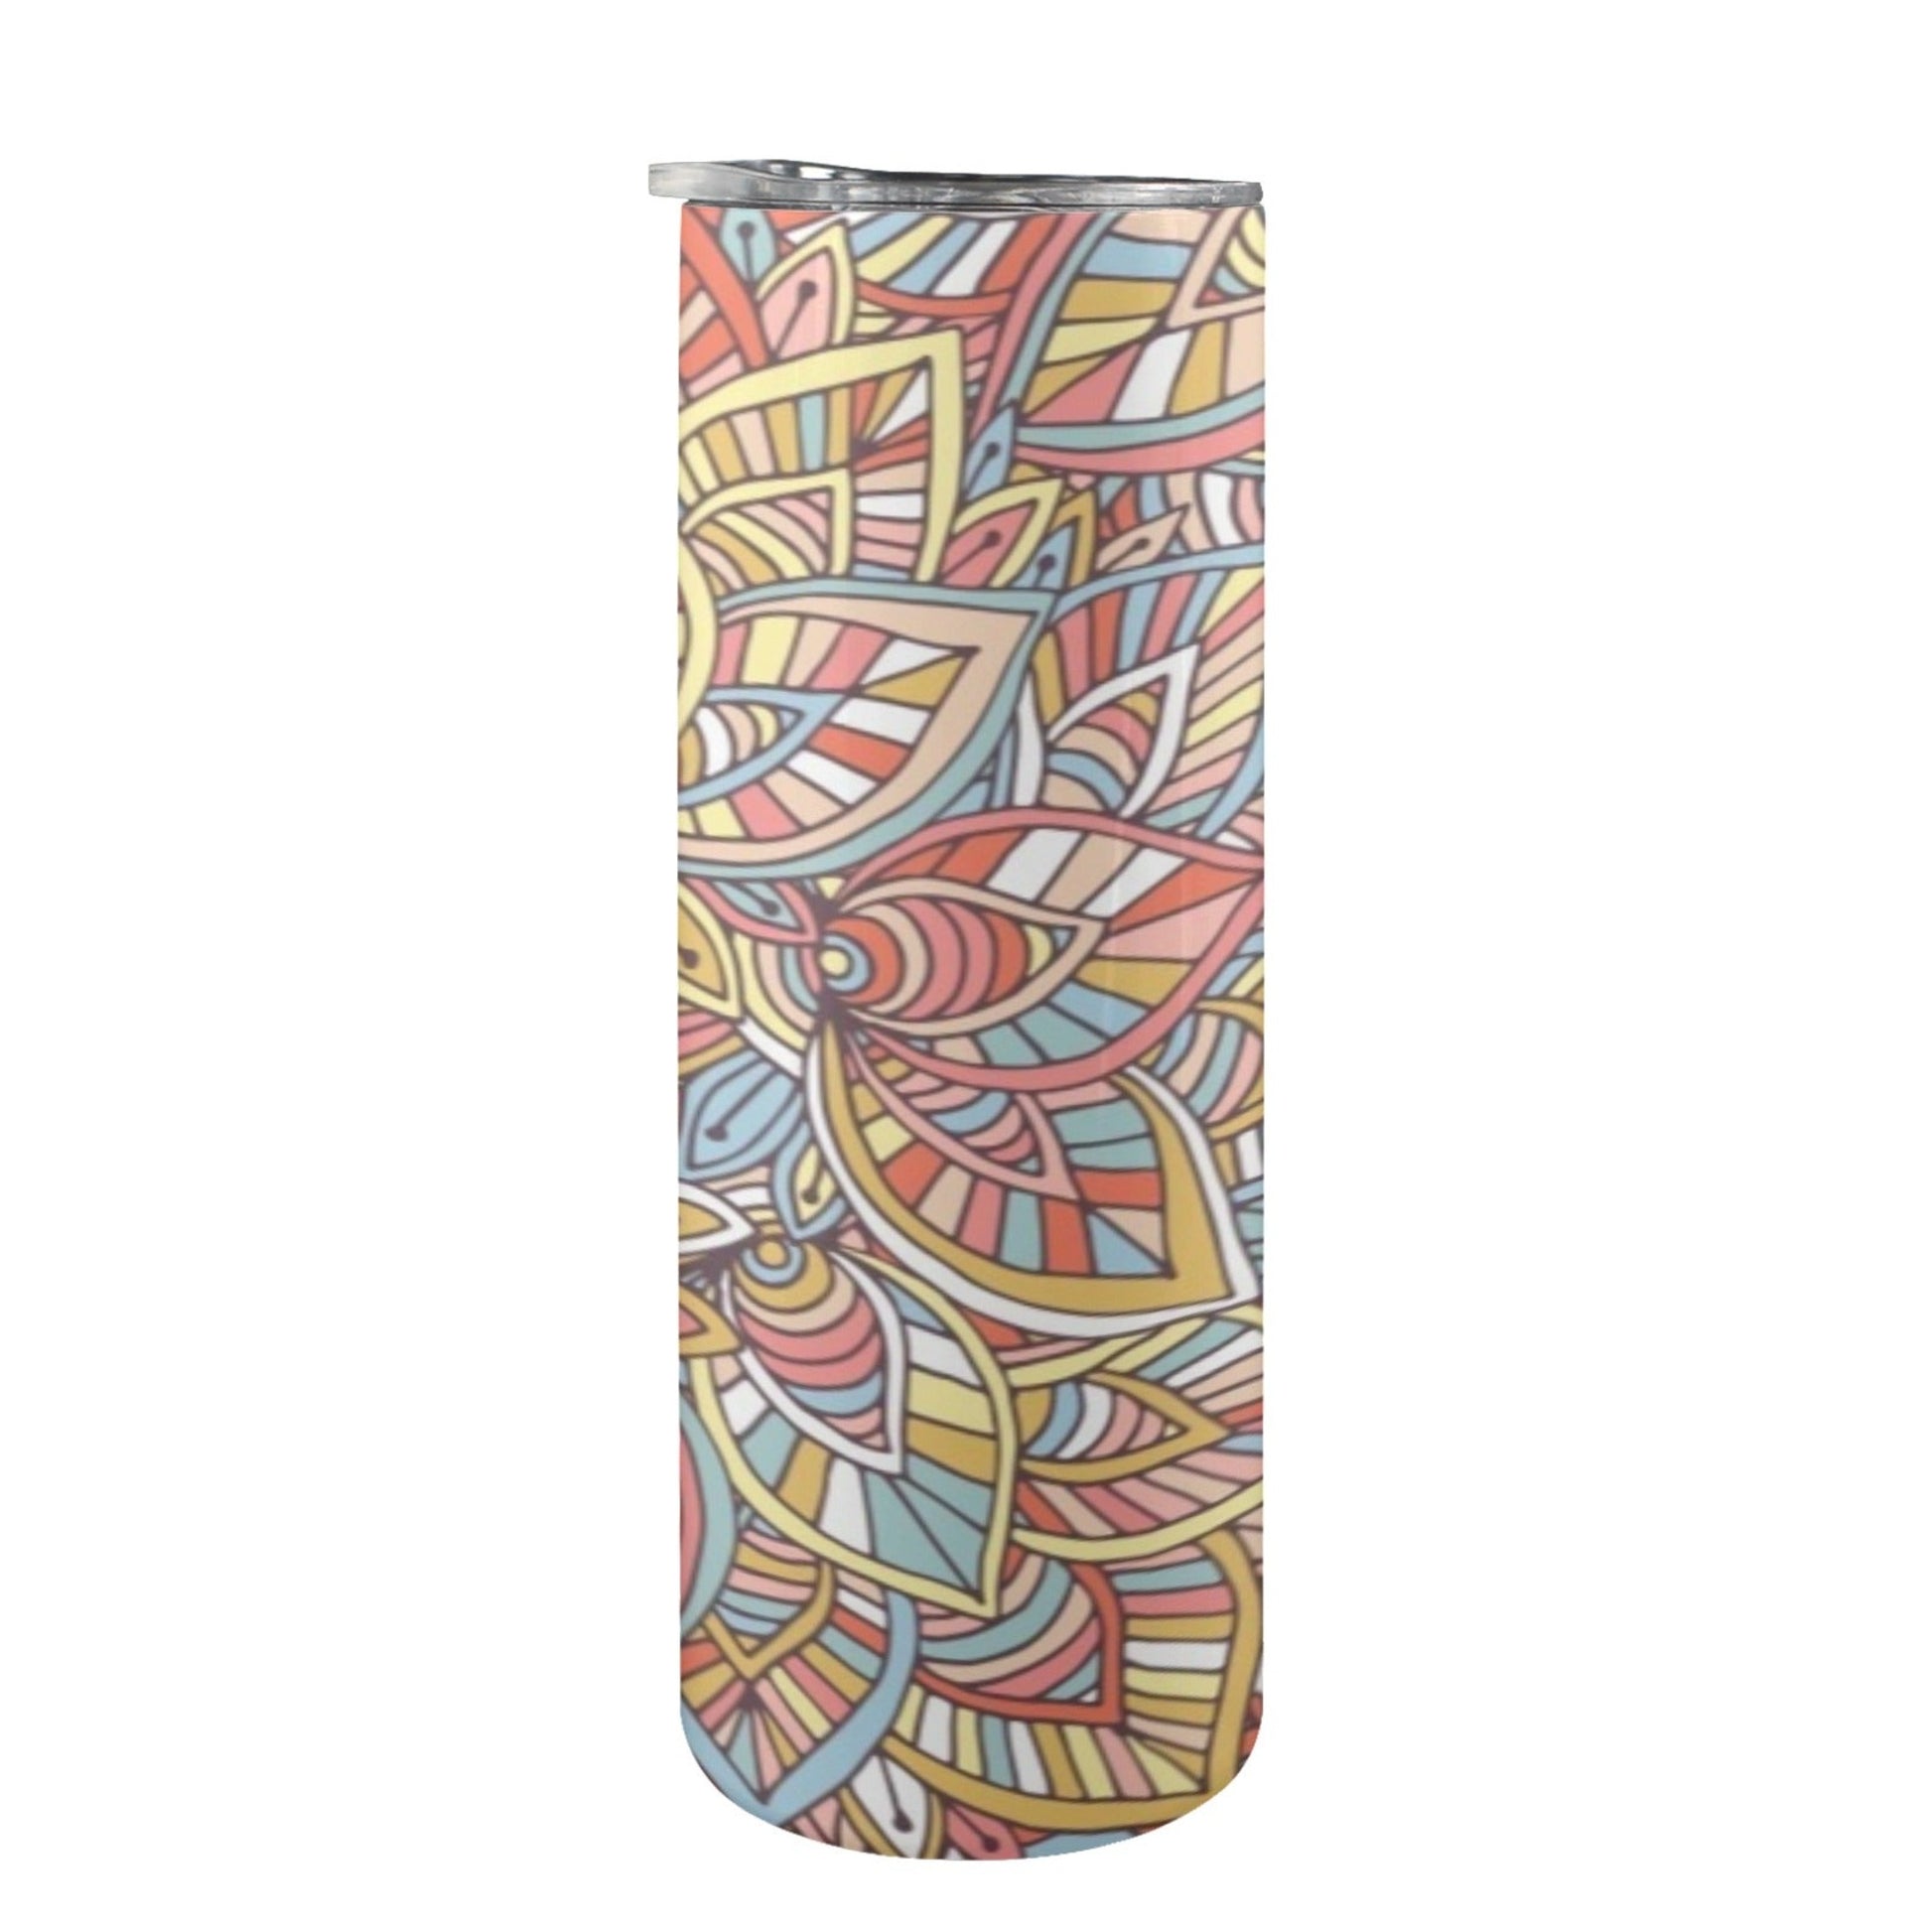 Colour Floral - 20oz Tall Skinny Tumbler with Lid and Straw 20oz Tall Skinny Tumbler with Lid and Straw